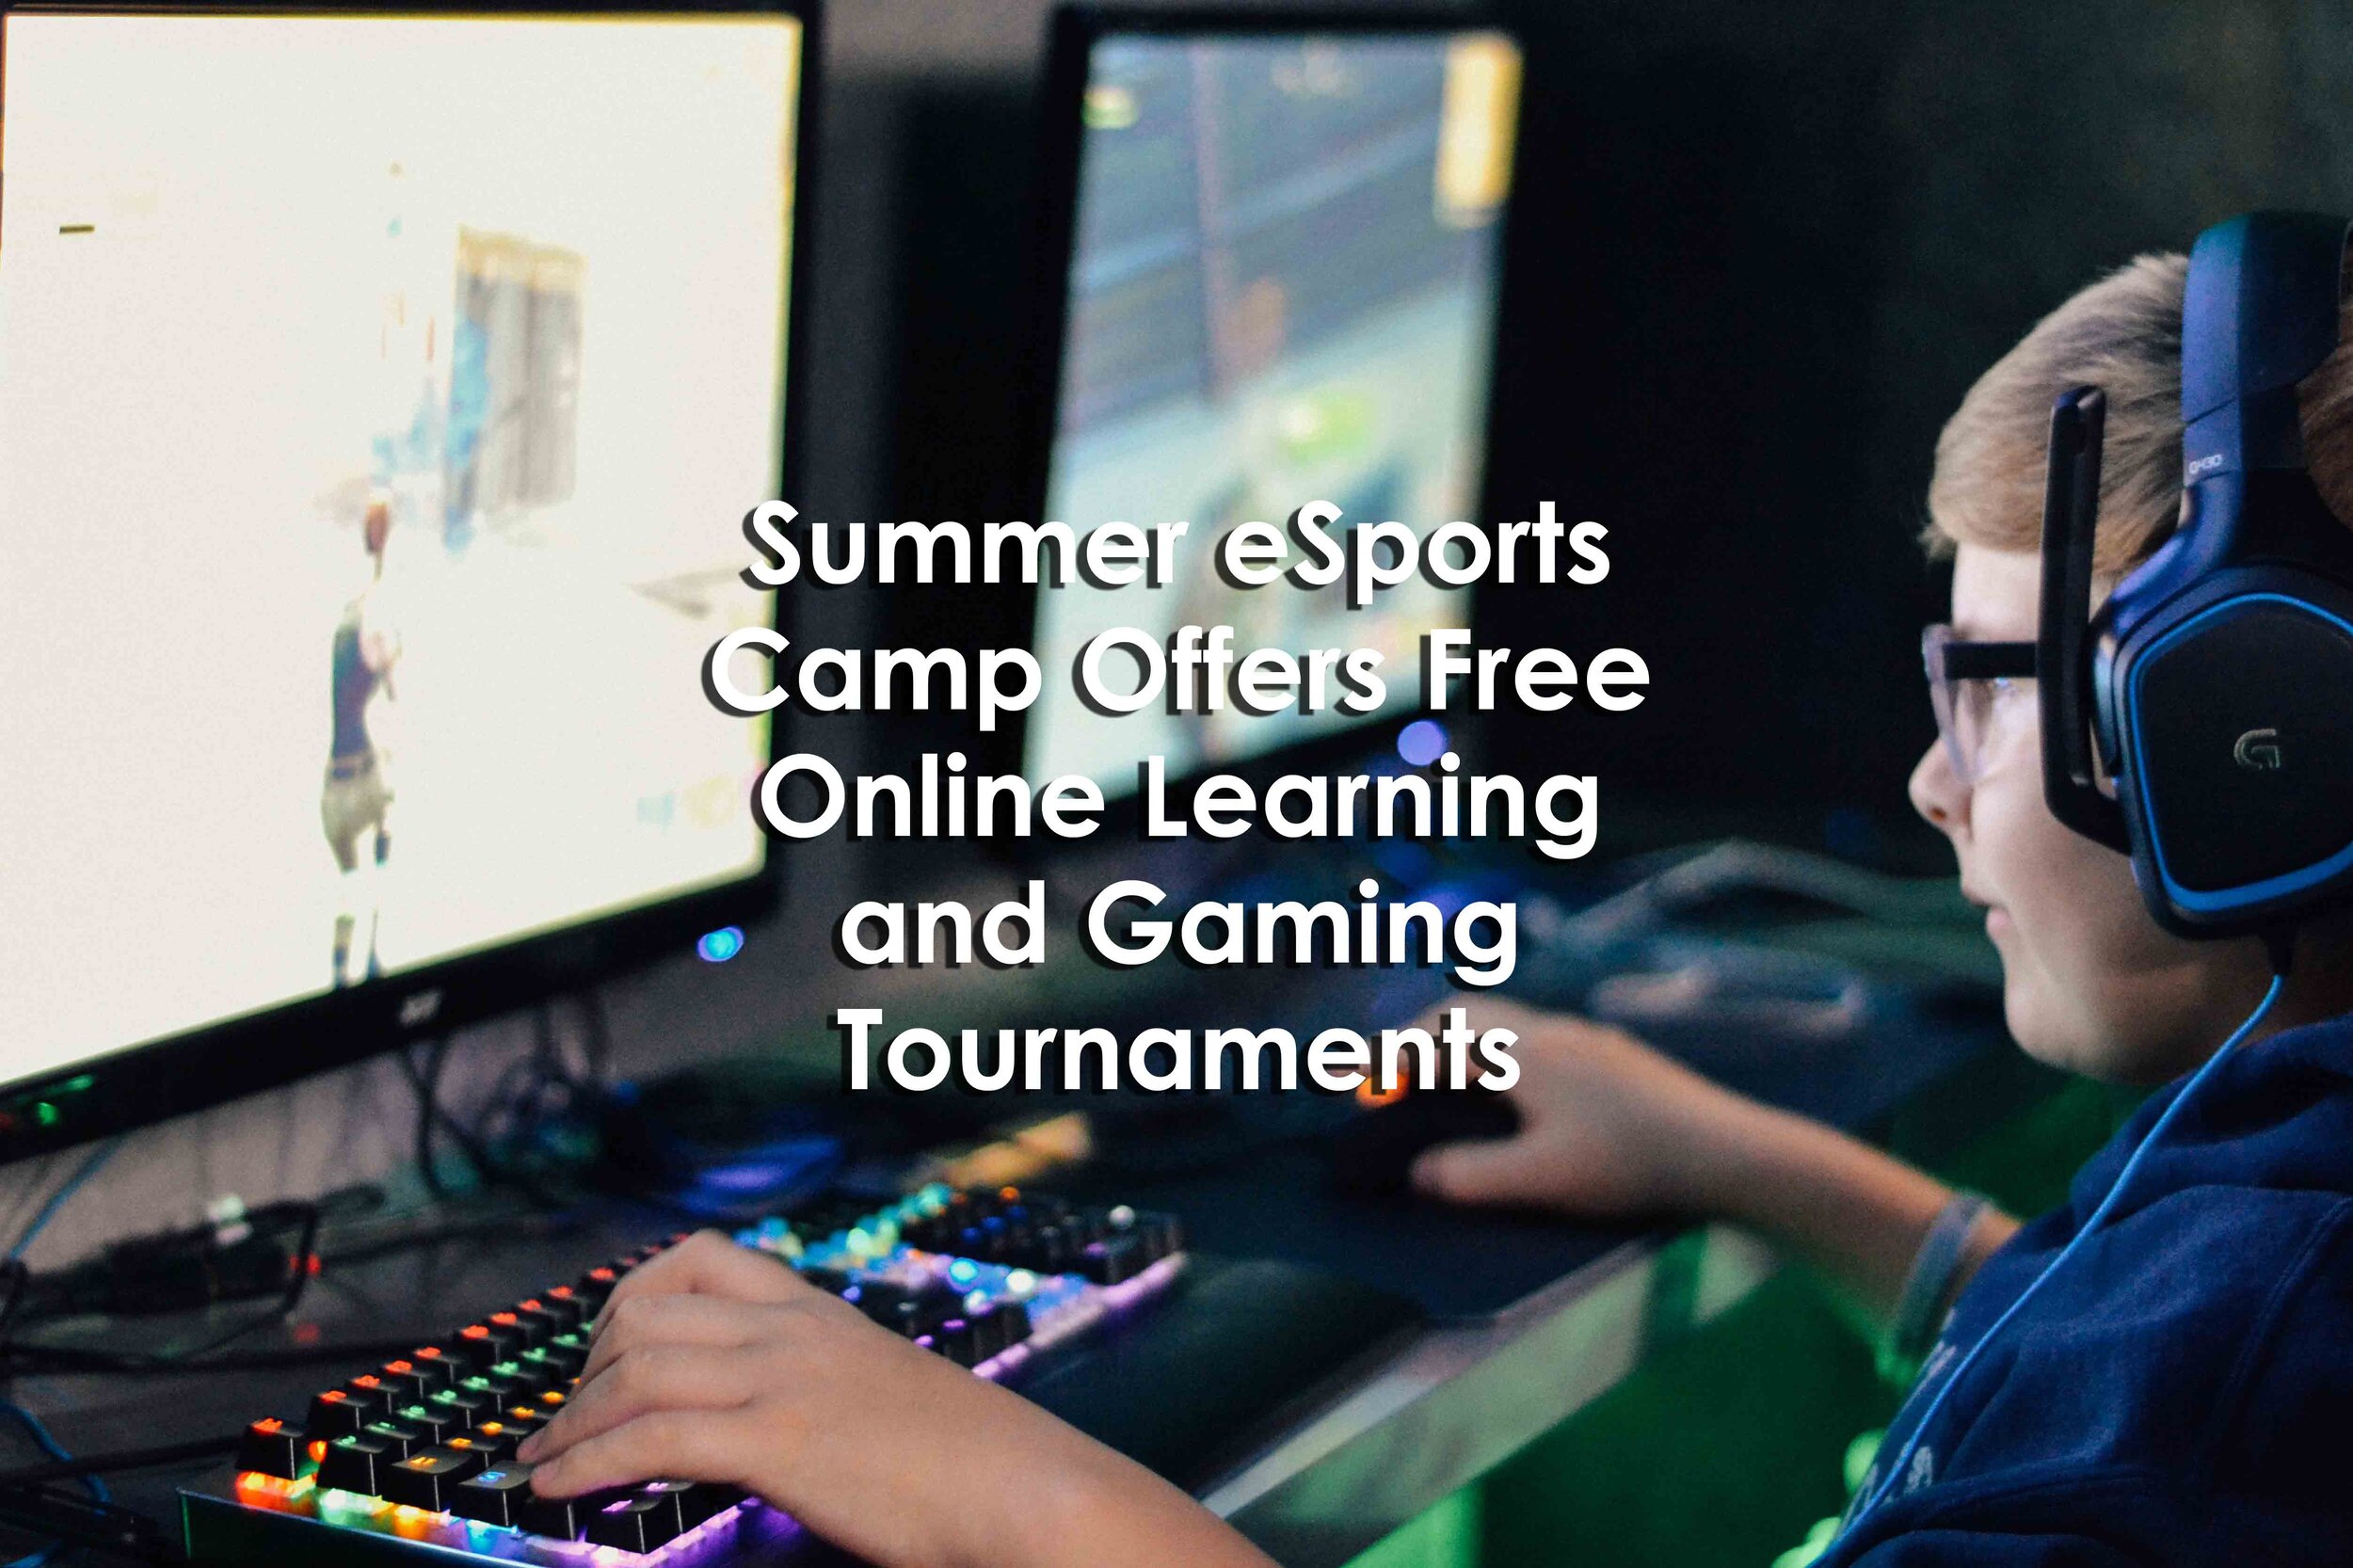 Summer eSports Camp Offers Free Online Learning and Gaming Tournaments — University XP